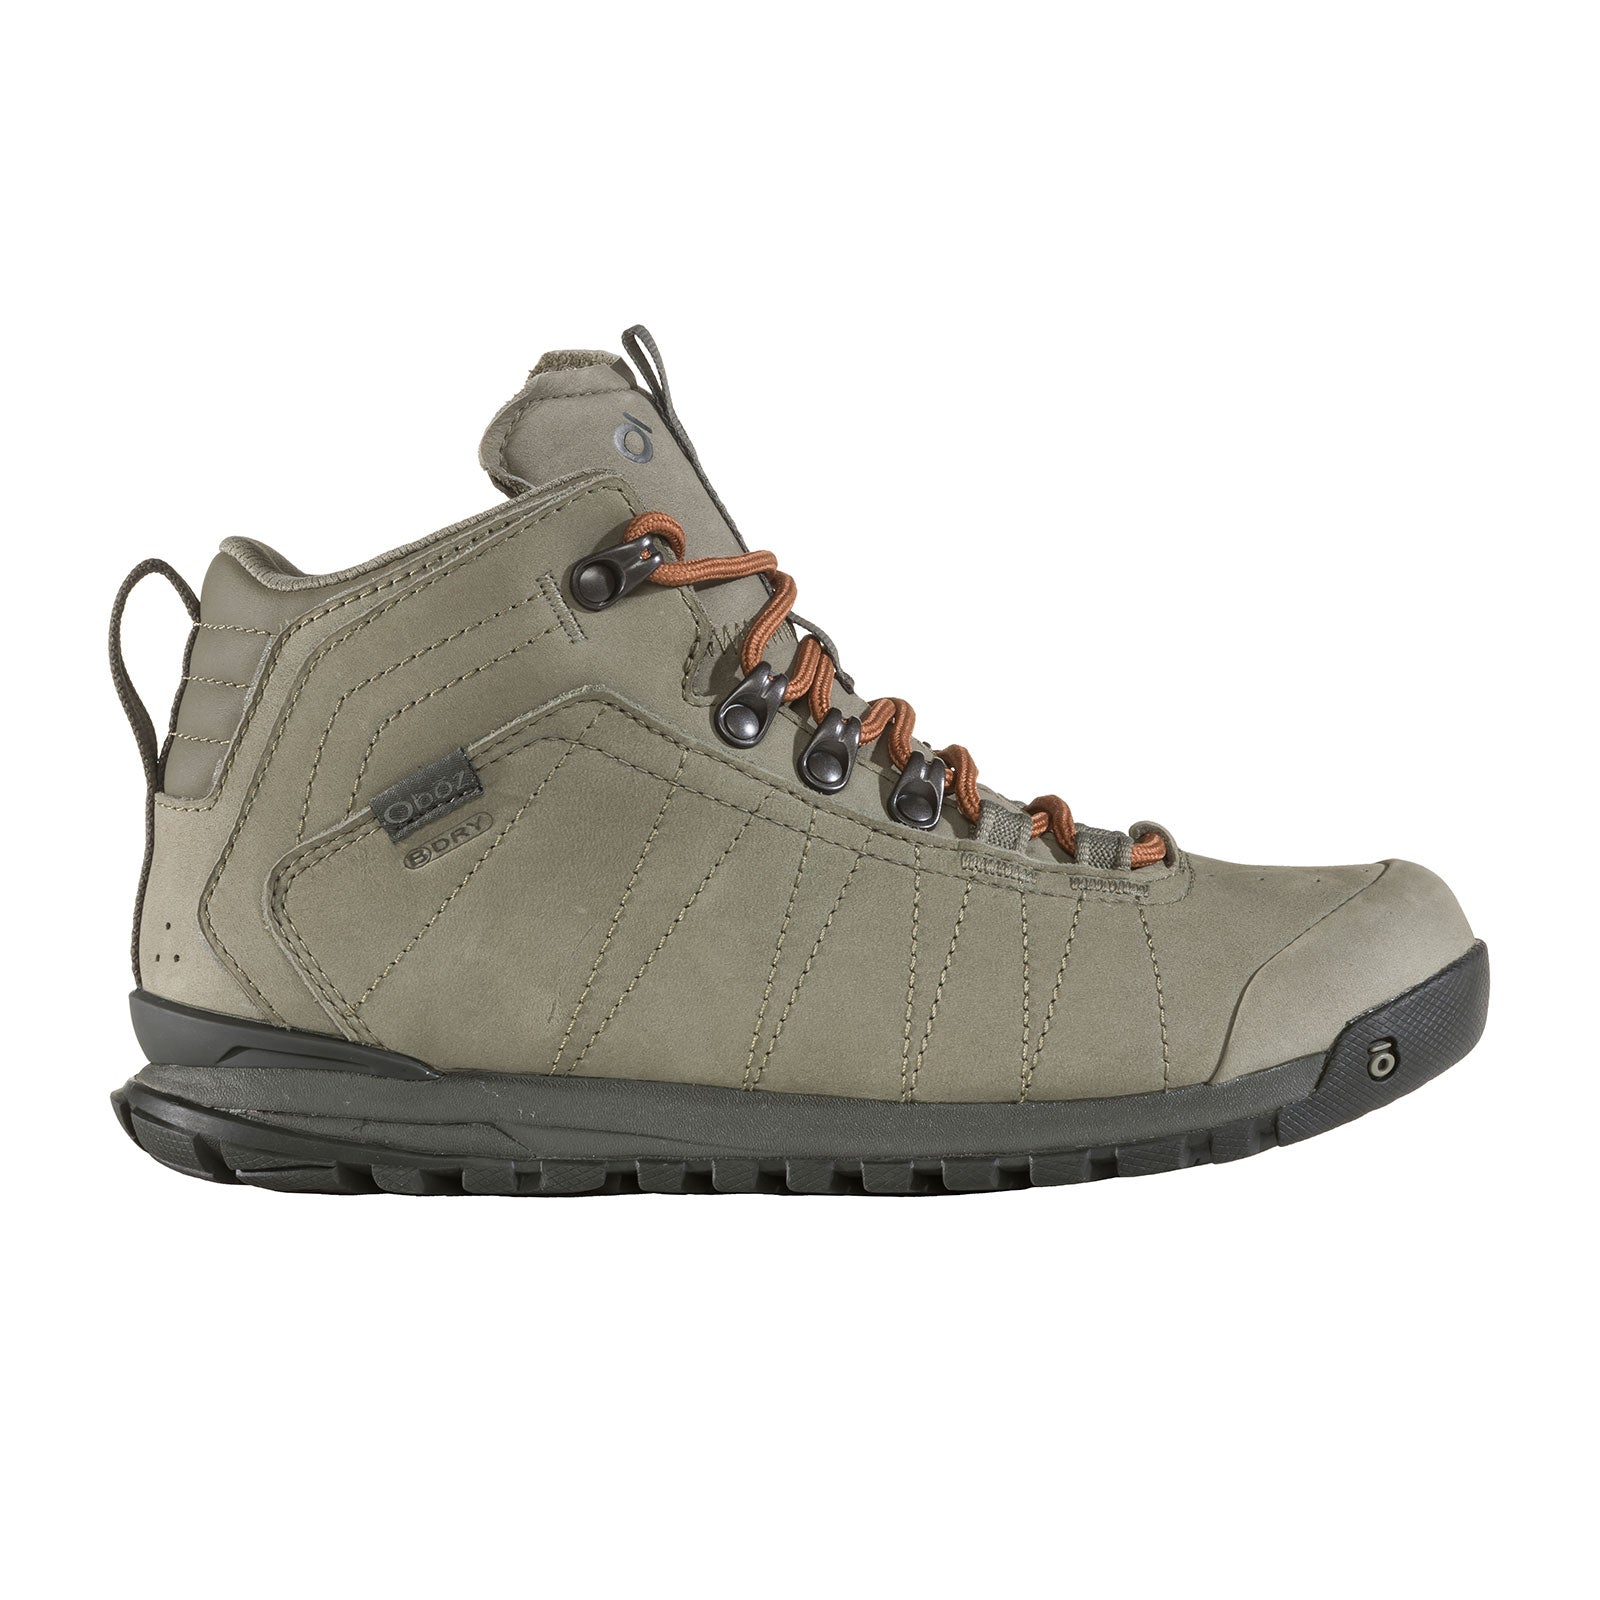 Oboz Bozeman Mid Leather B-DRY Hiking Boot (Women) - Pinedale Boots - Hiking - Mid - The Heel Shoe Fitters